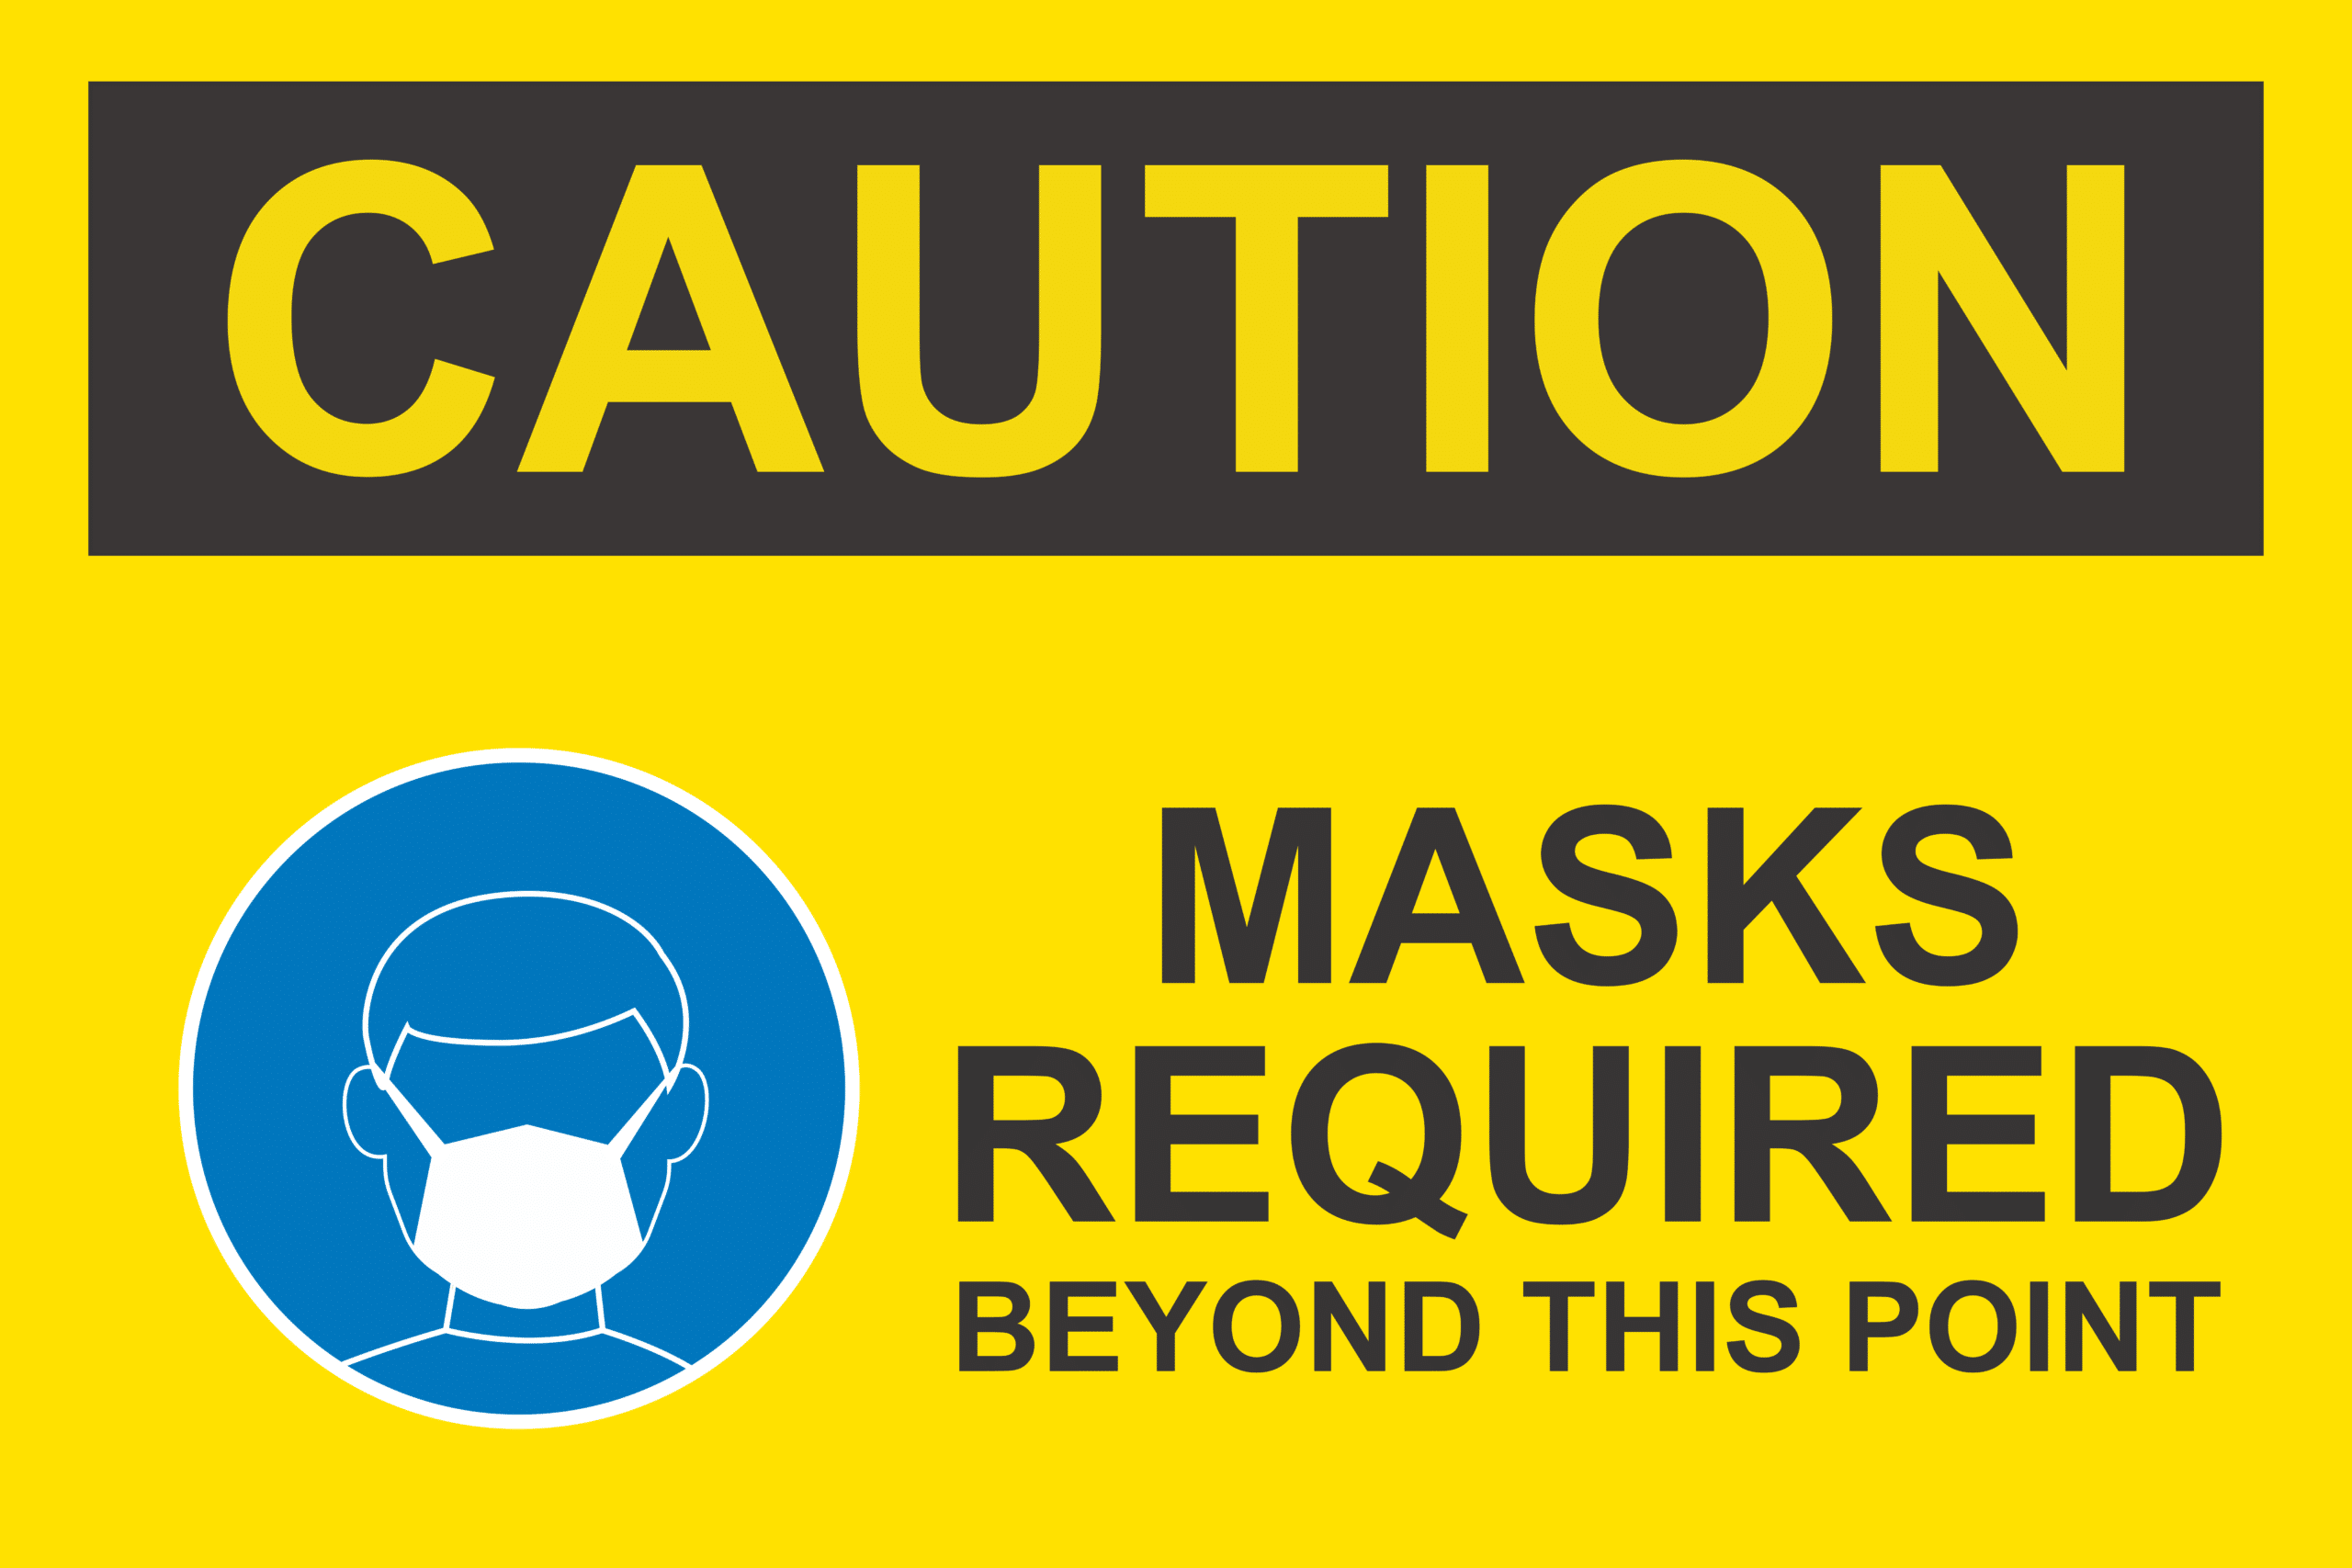 Covid 19 safety sign which reads caution masks required beyond this point as a precaution against the virus